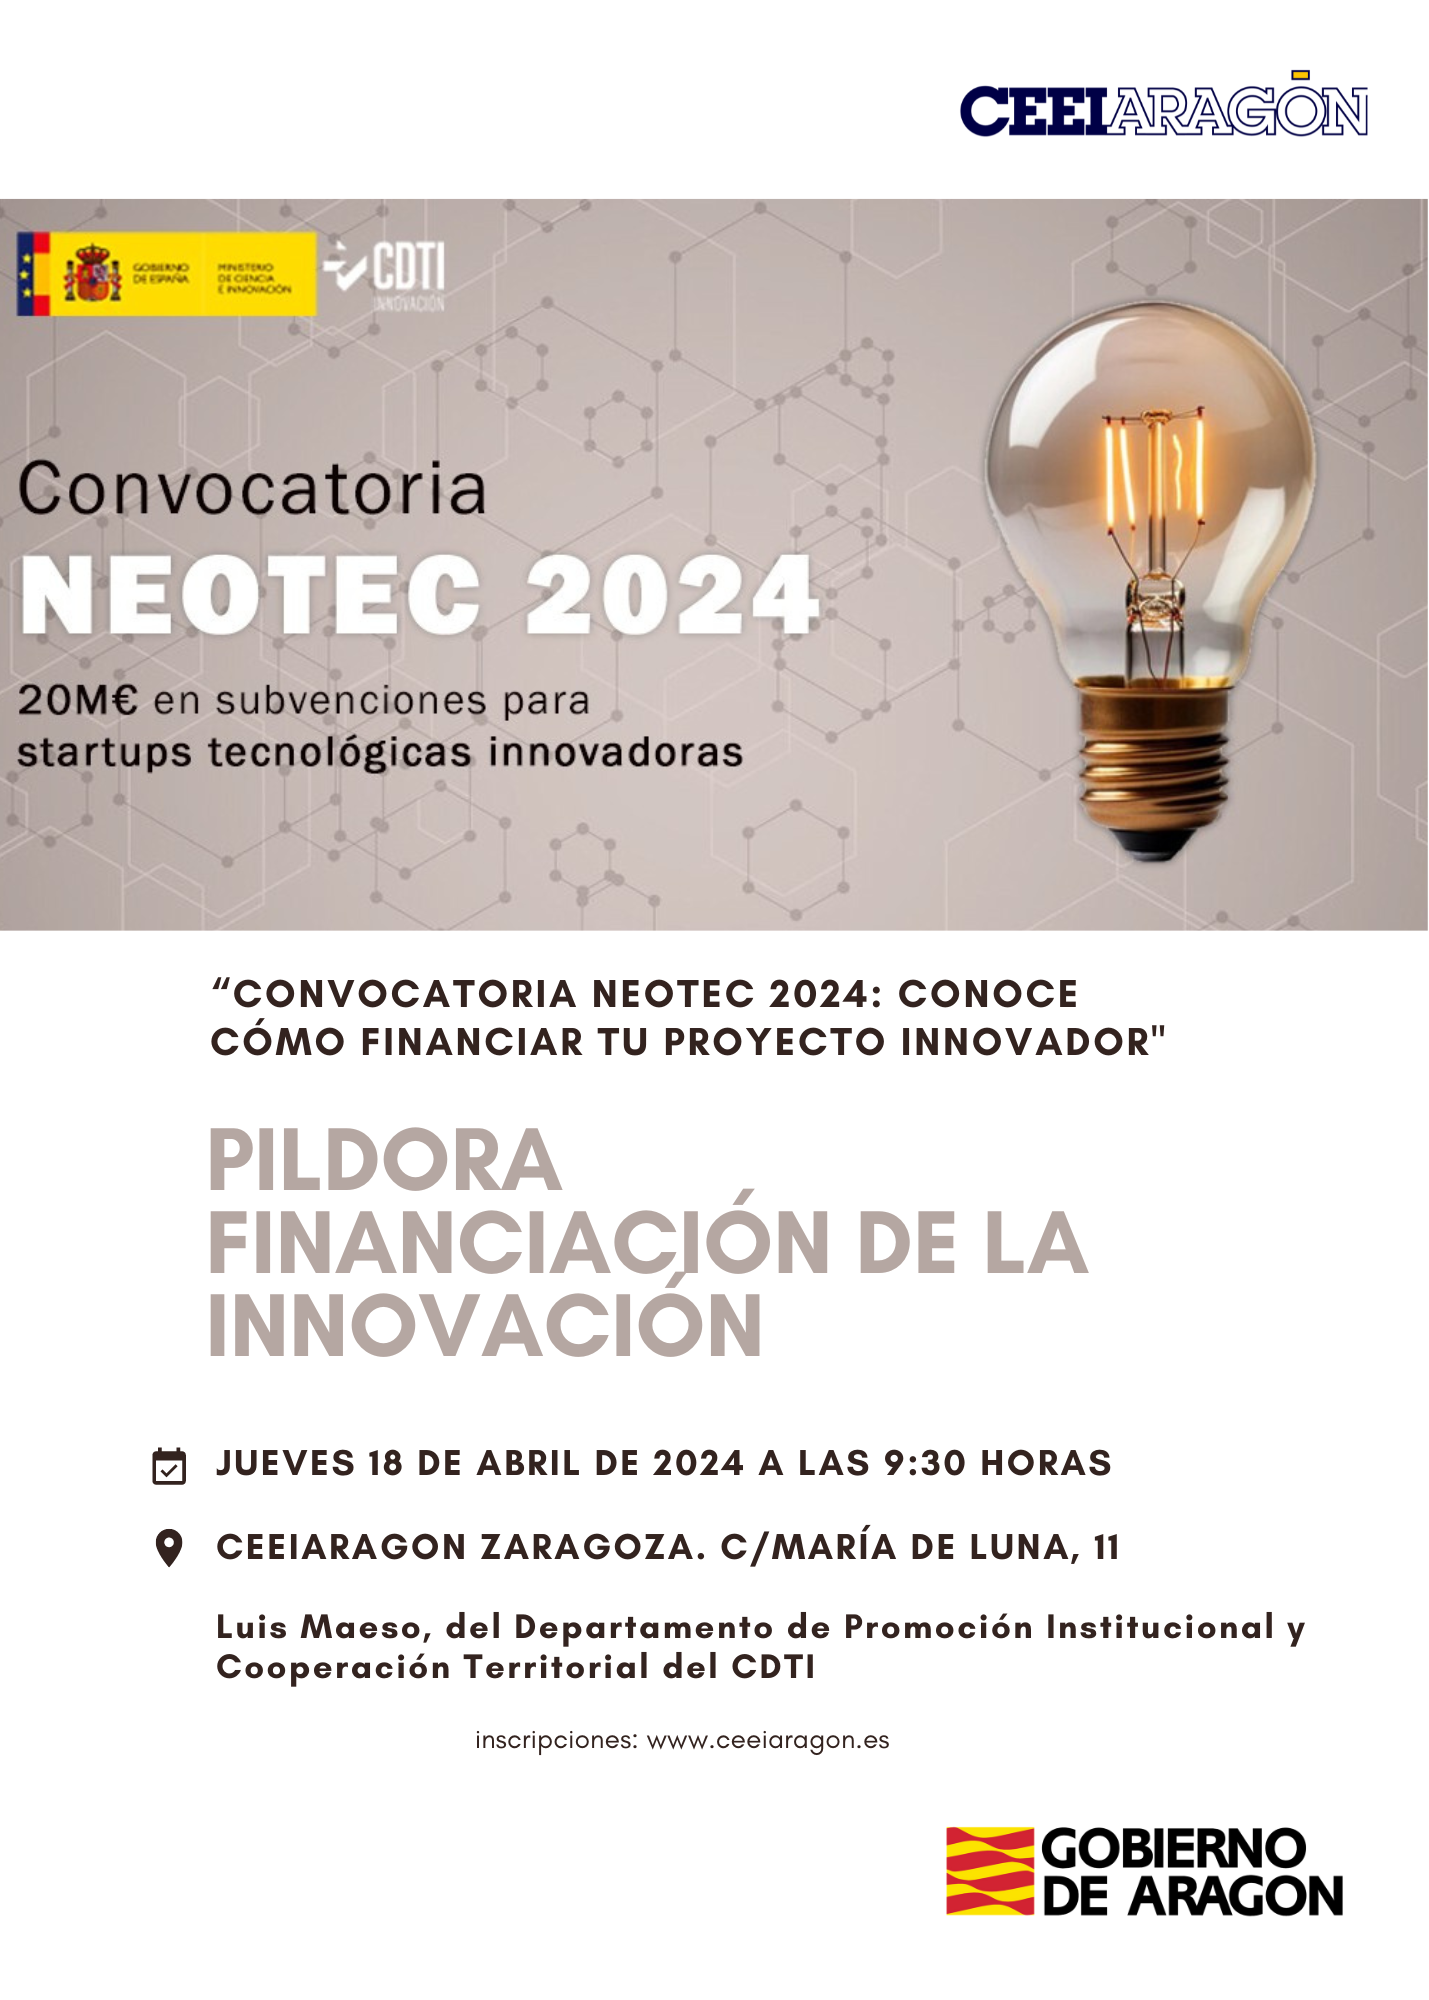 Innovation funding pill "NEOTEC call for proposals: find out how to finance your innovative project"